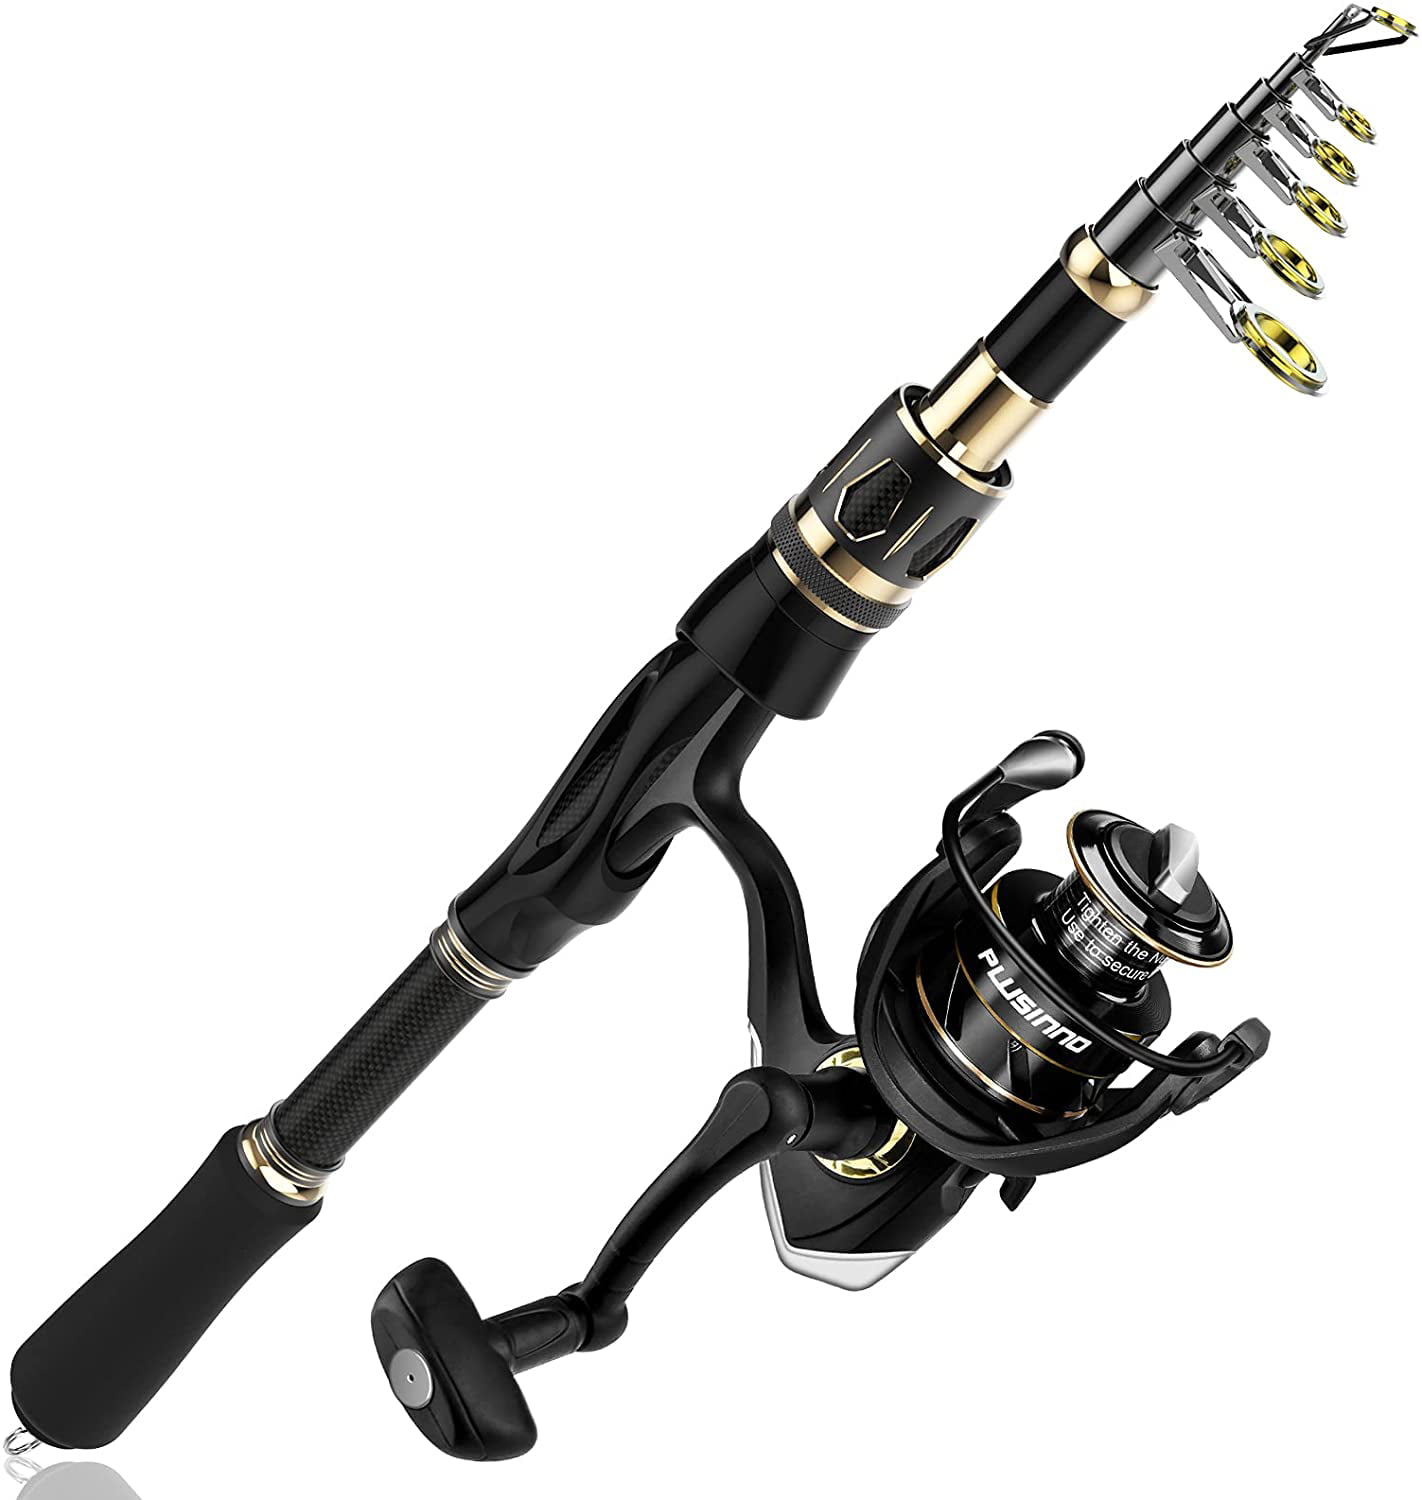 PLUSINNO Kids Fishing Pole,Light and Portable Telescopic Fishing Rod and Reel Combos for Youth ice Fishing